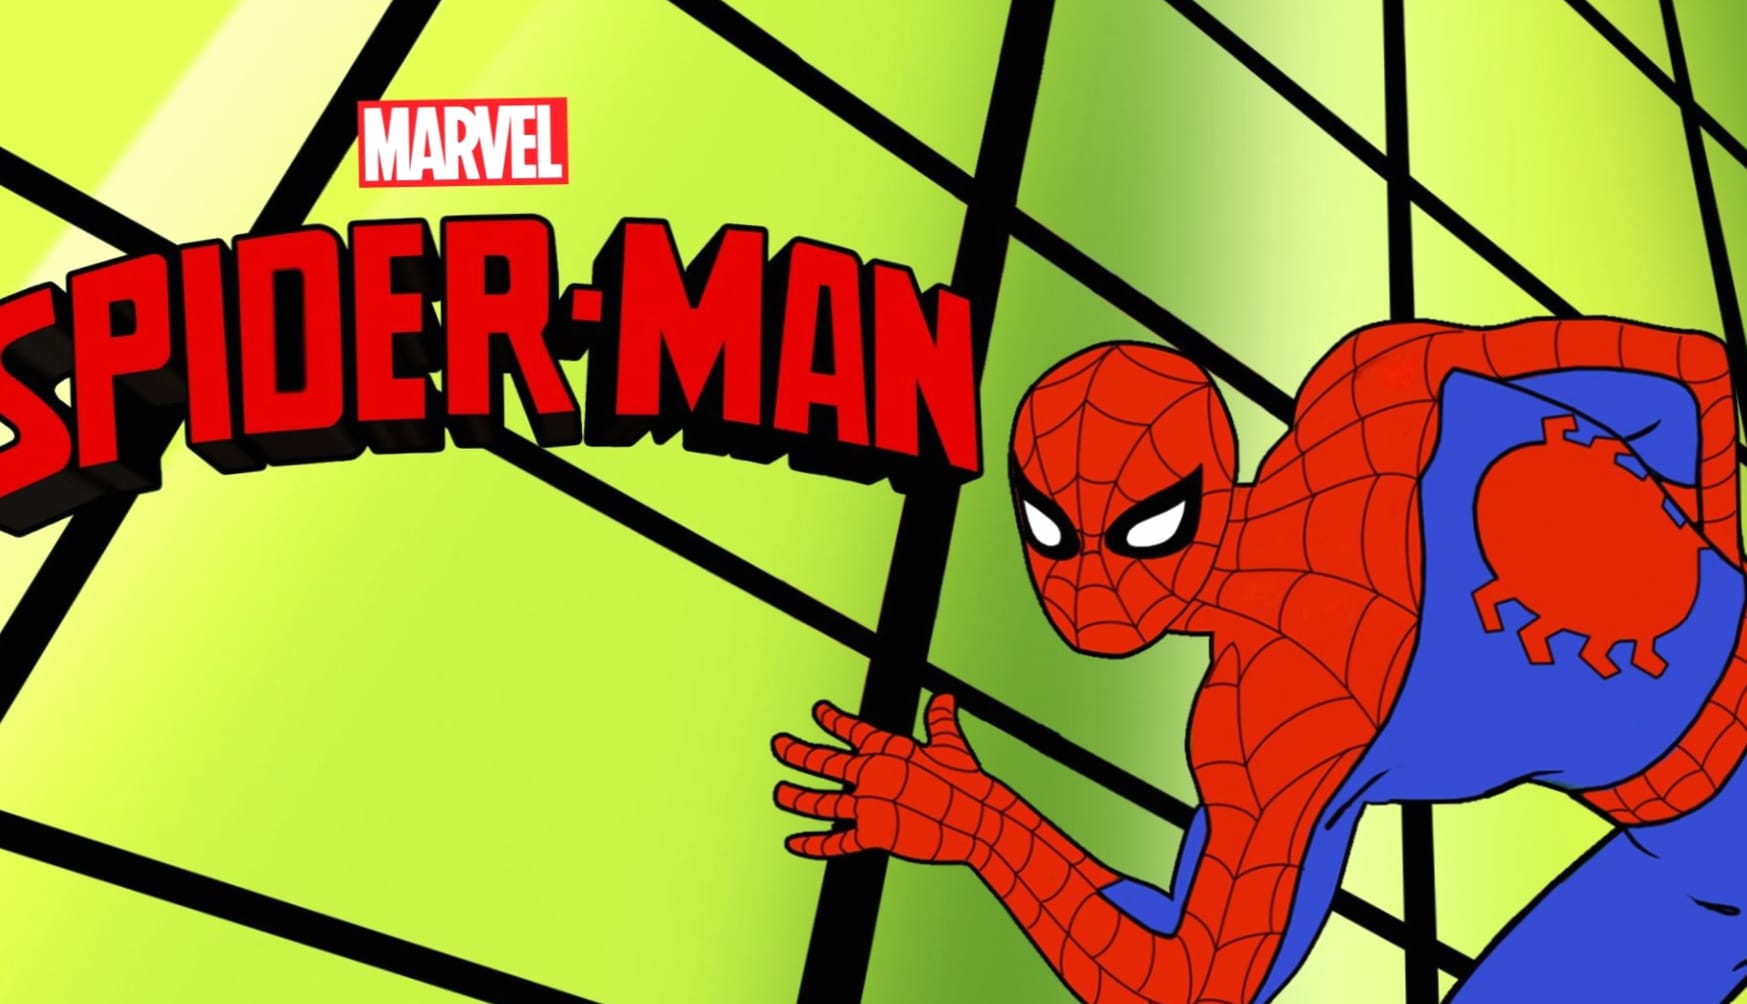 Spider-Man (1967) wallpapers HD quality